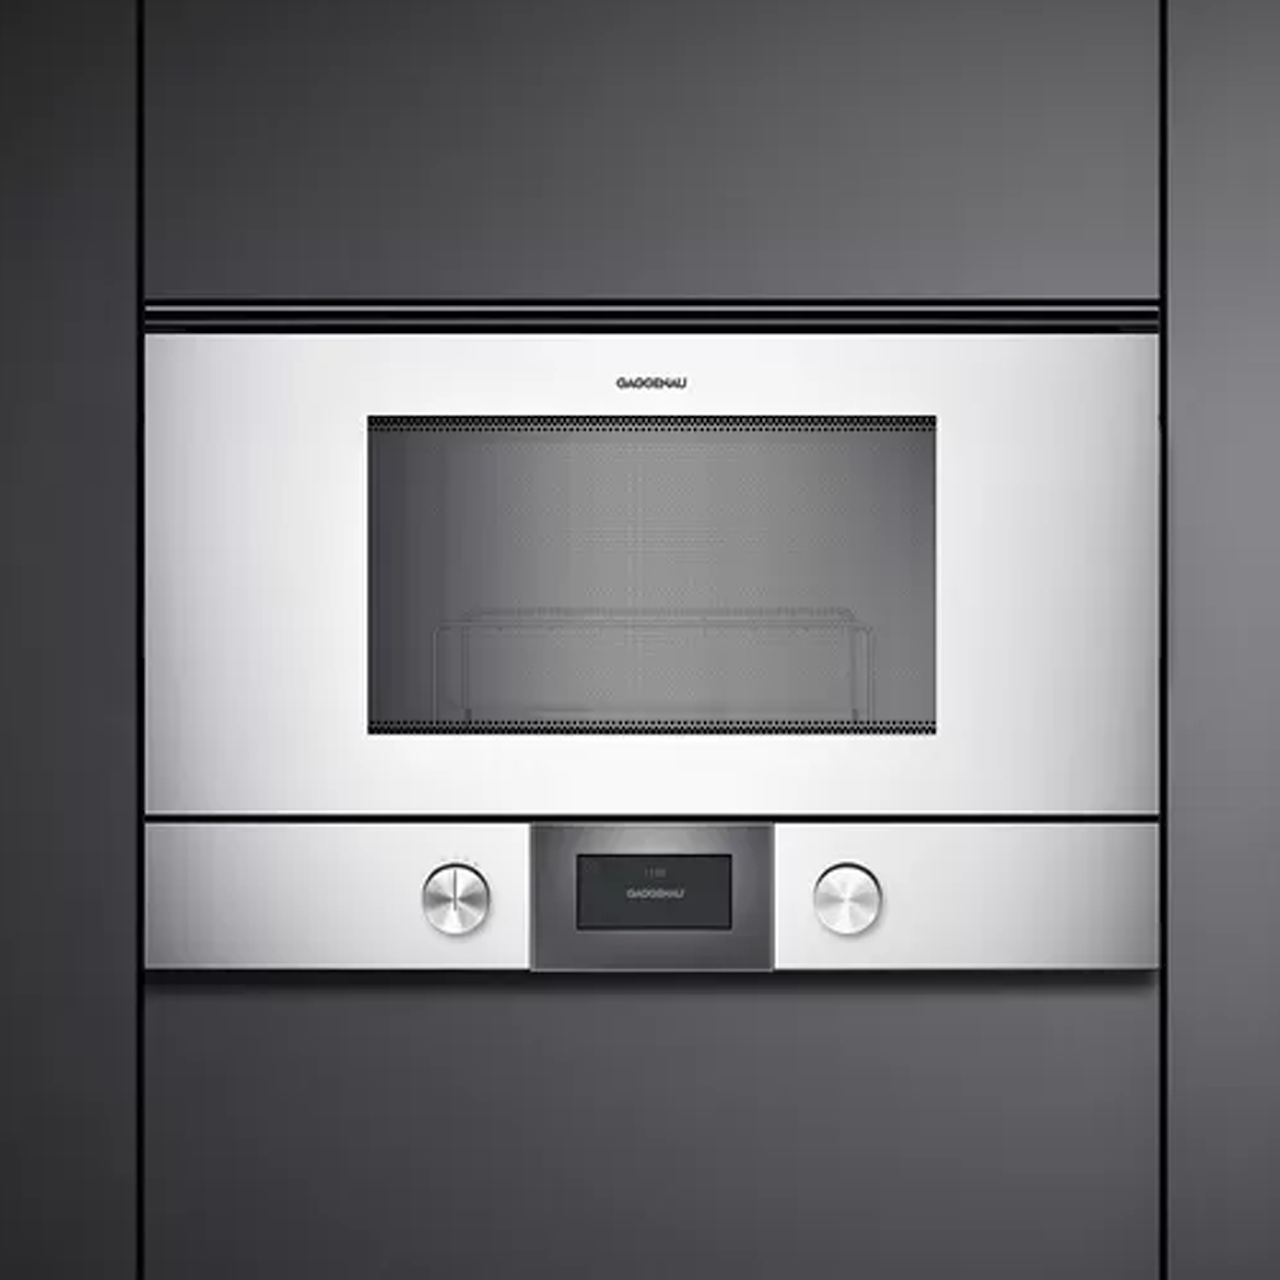 Microwave S200 - Silver